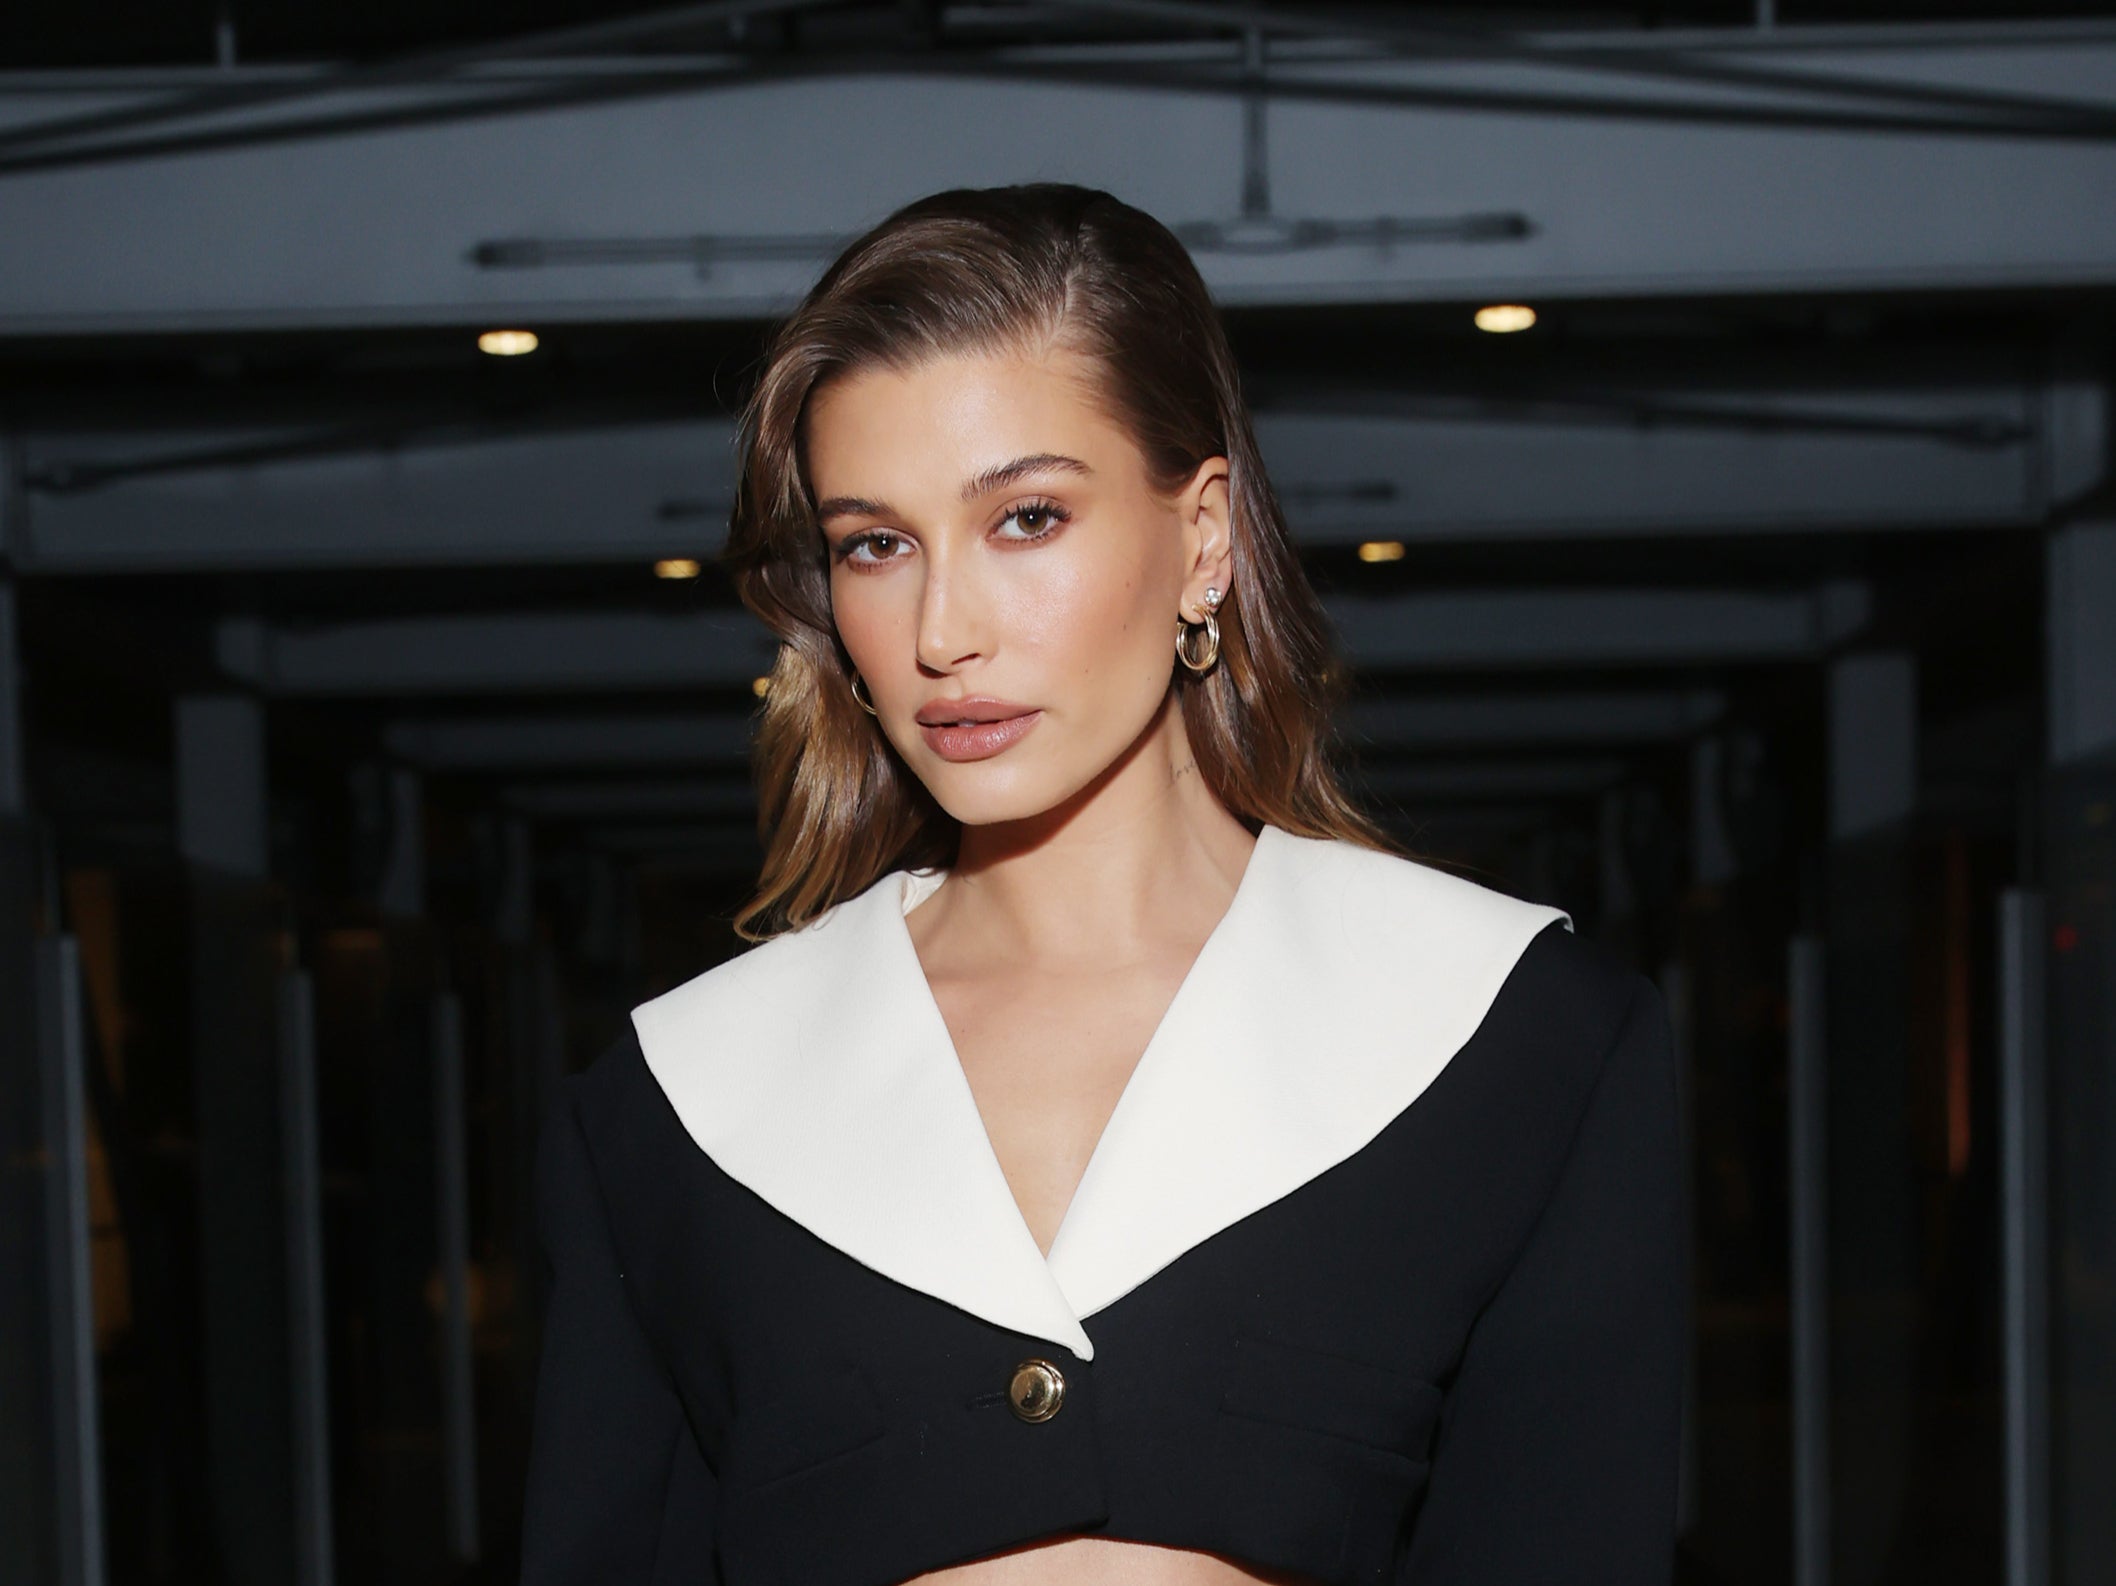 Hailey Bieber is recovering after suffering from a ‘very small’ blood clot